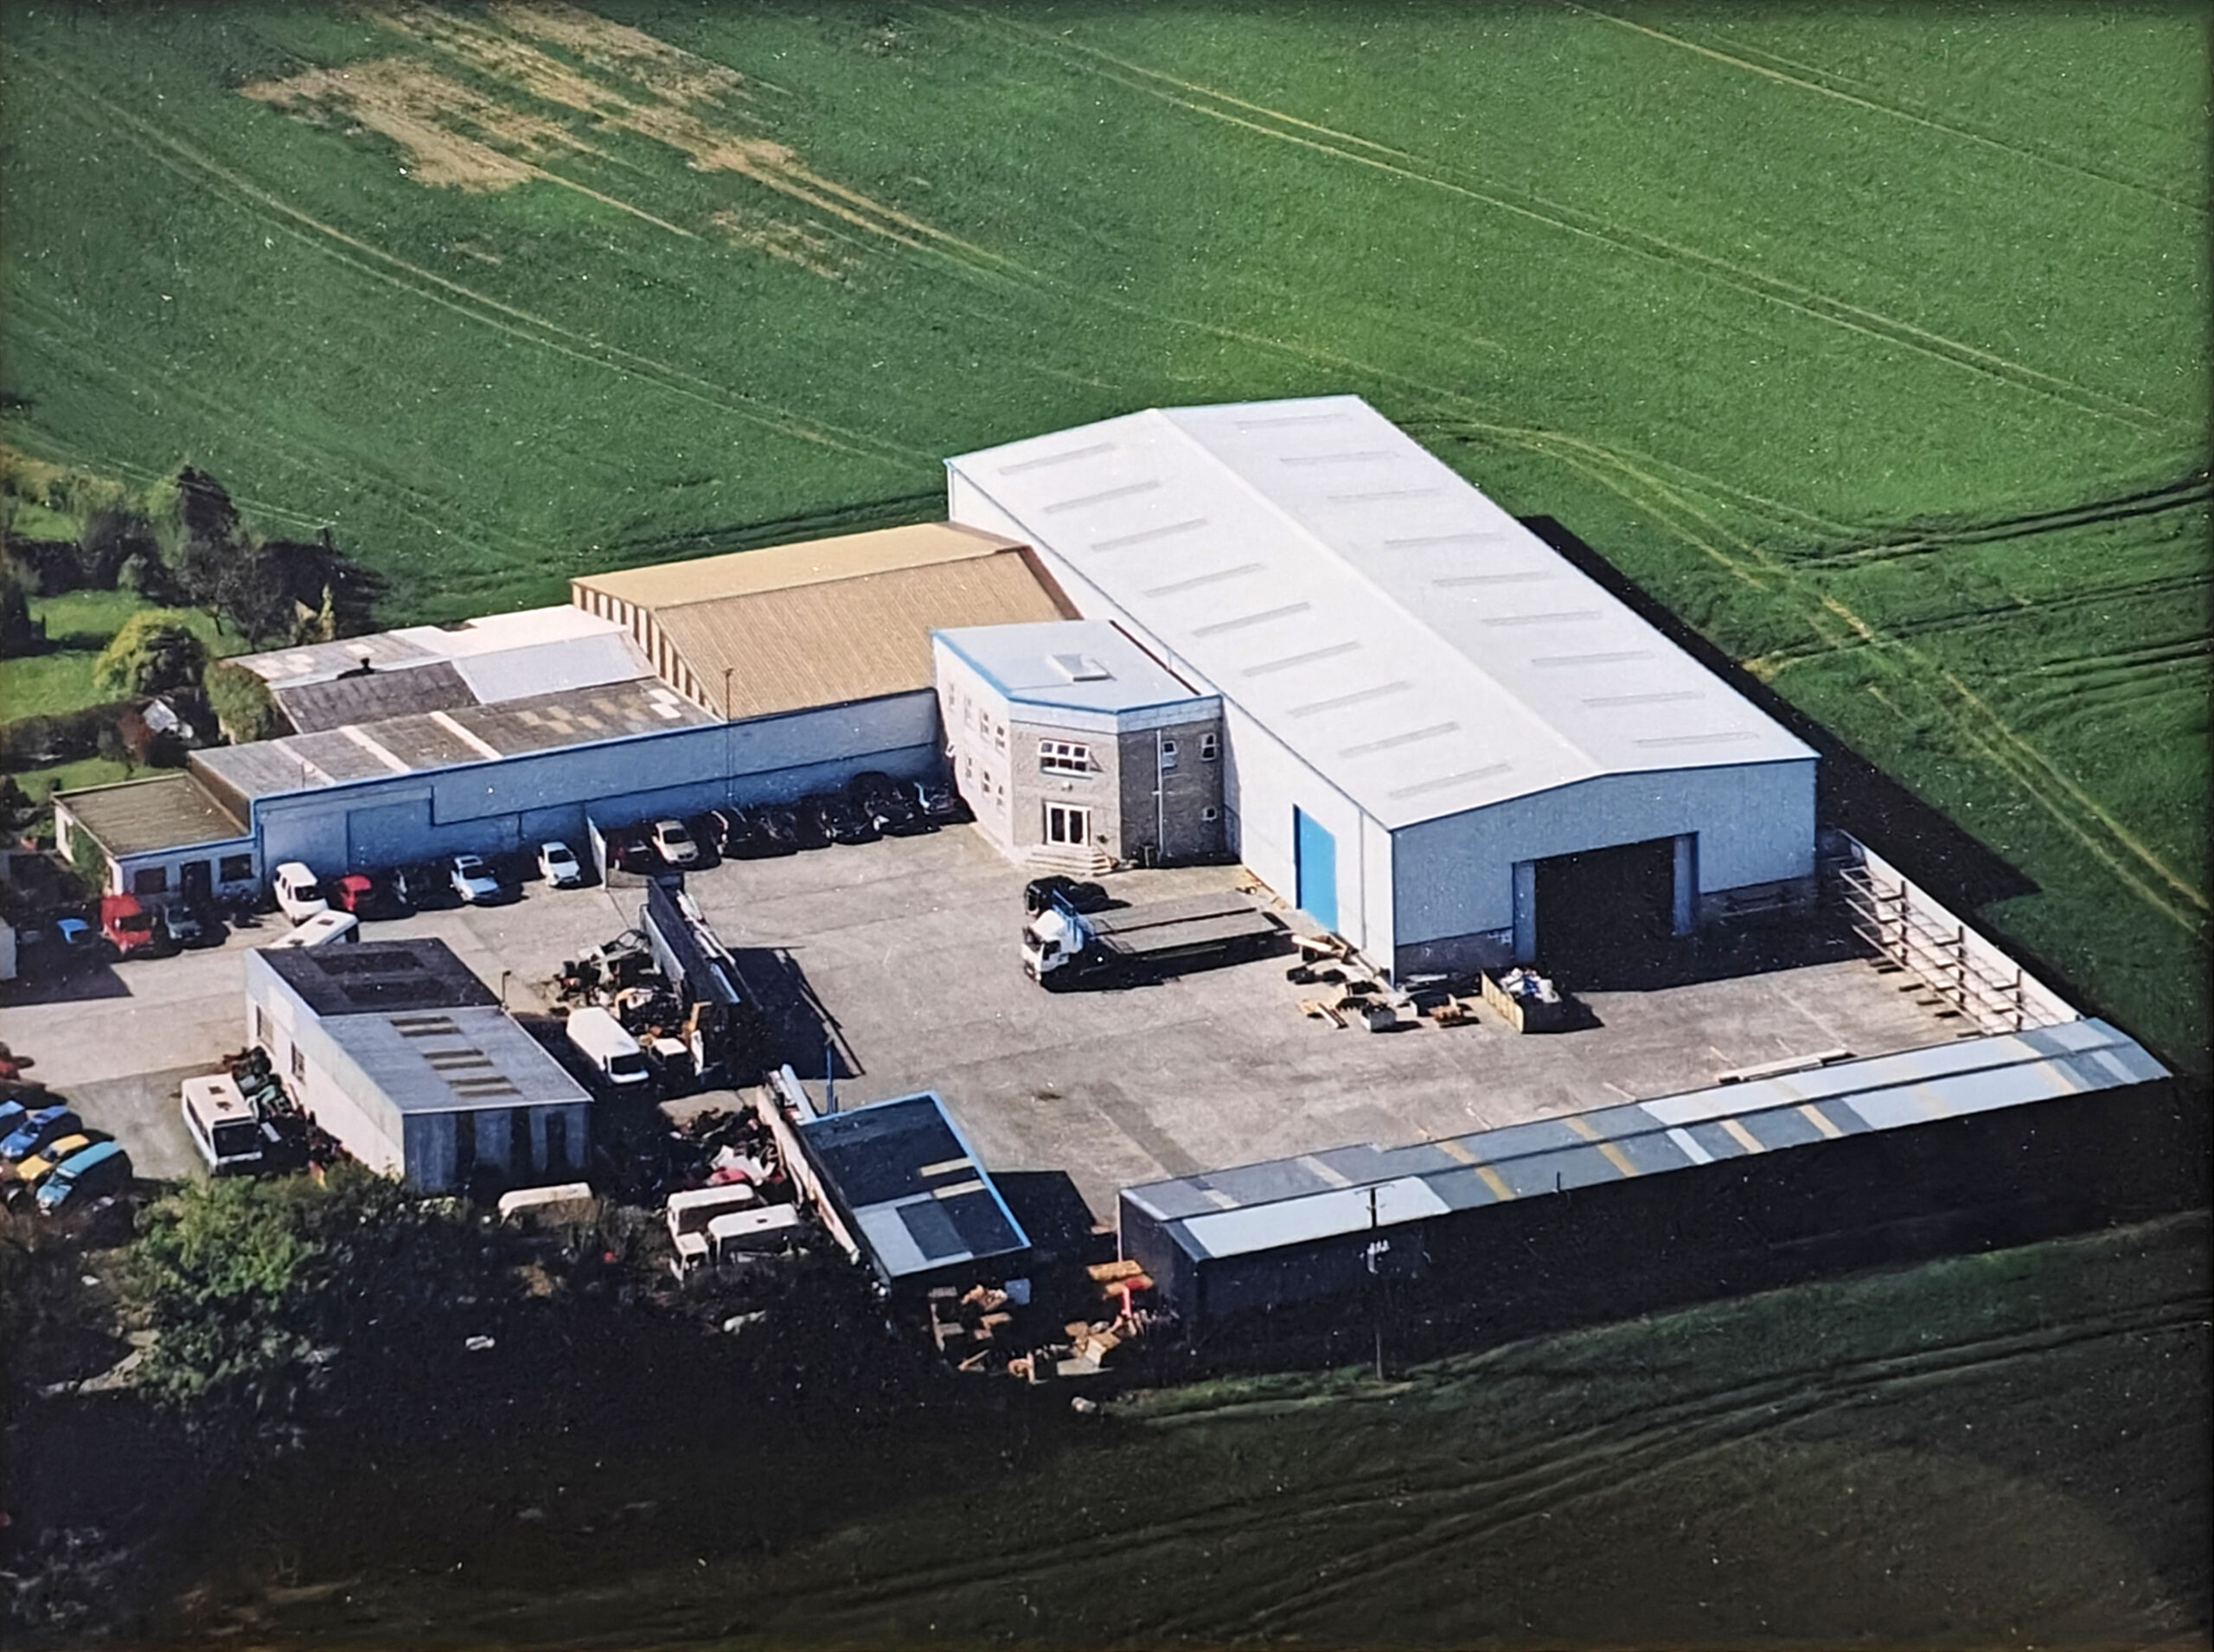 An aerial view of a steel manufacturers' industrial building.